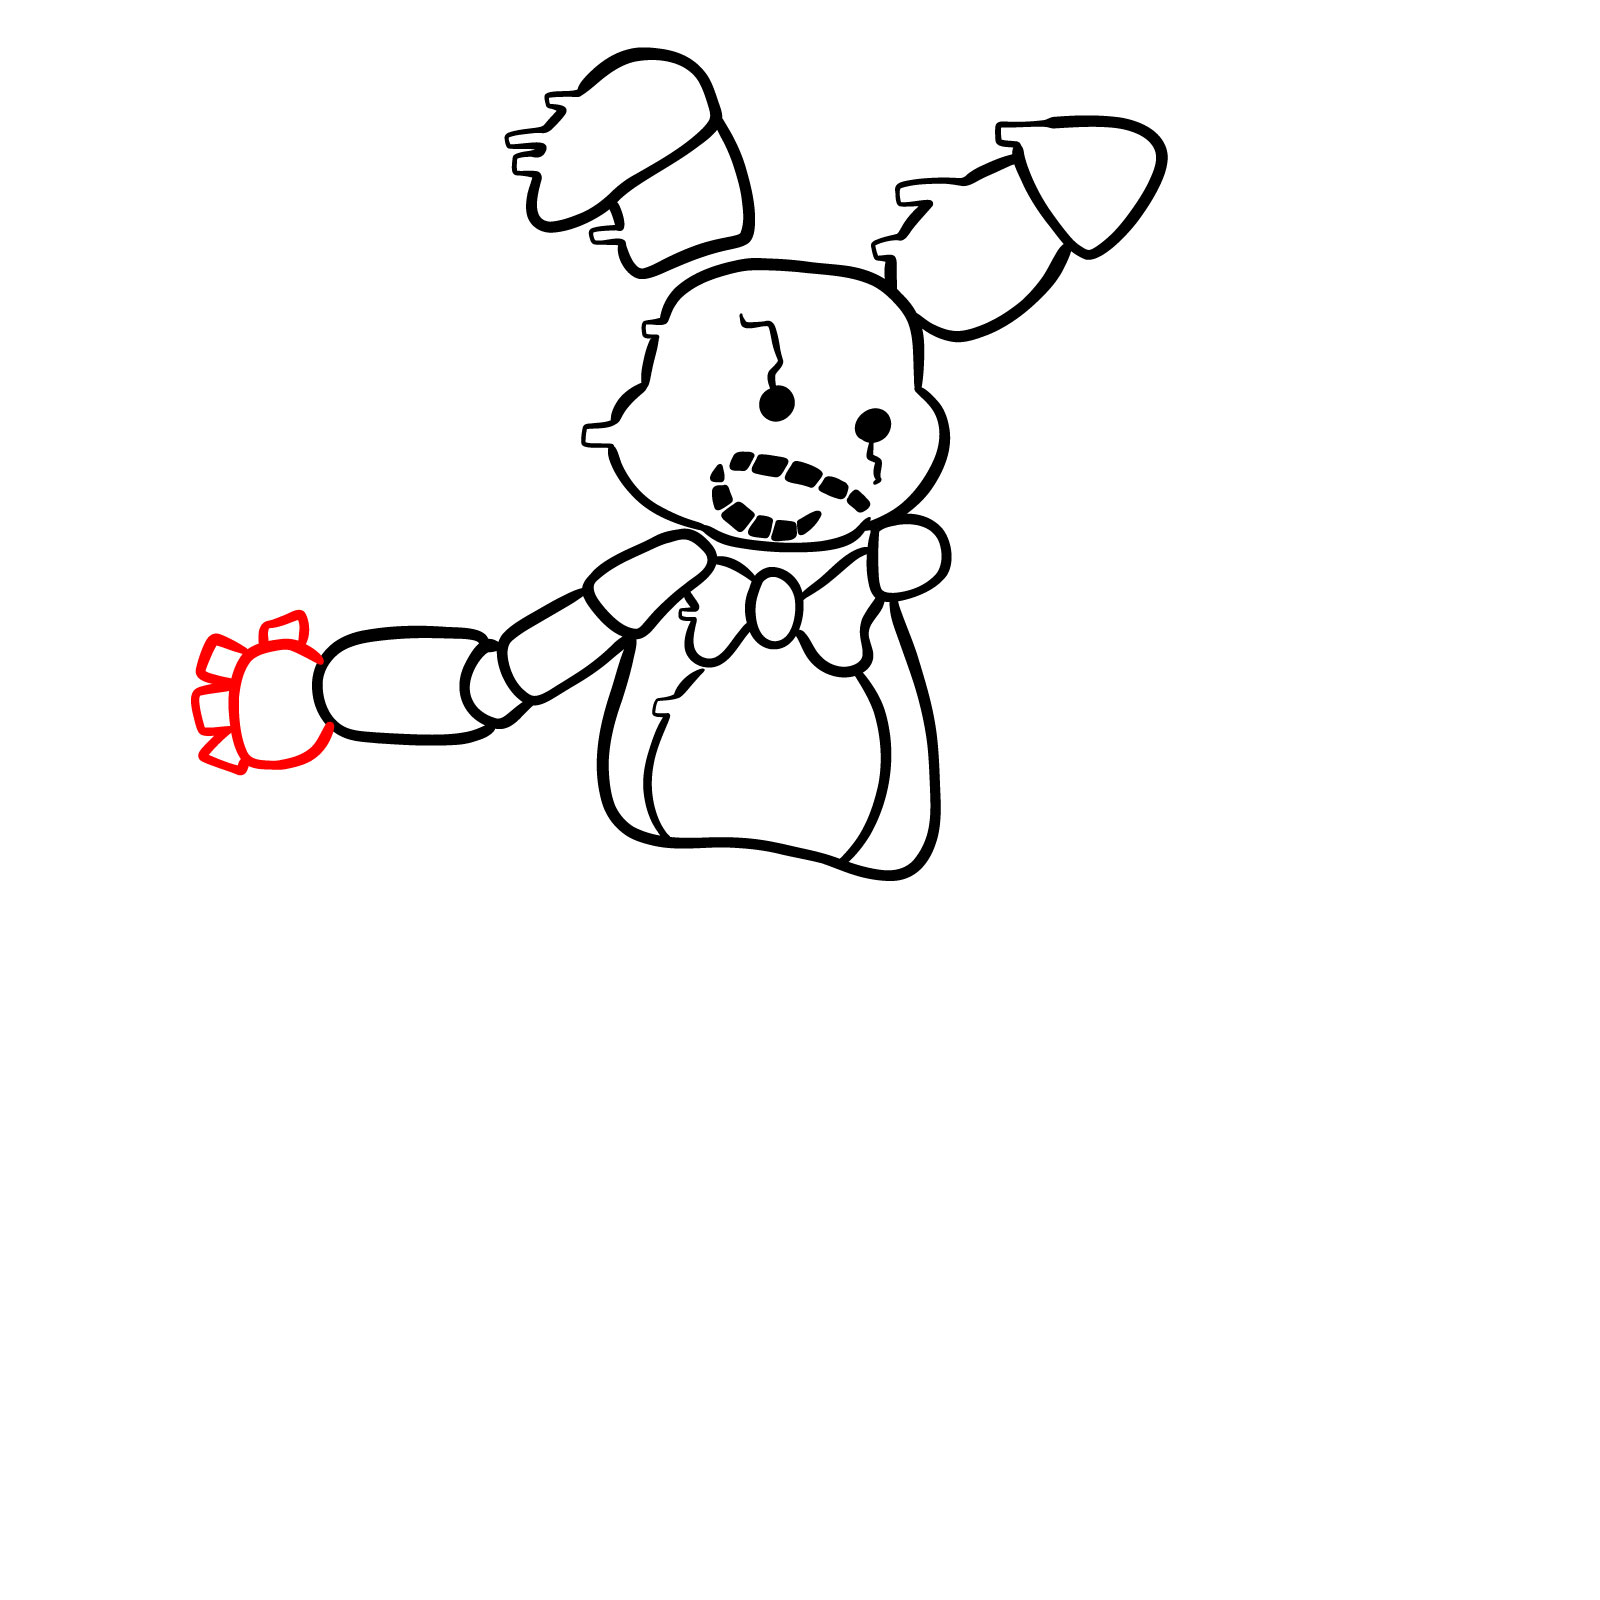 How to draw Shadow Bonnie from FNF: Glitched Legends - step 18